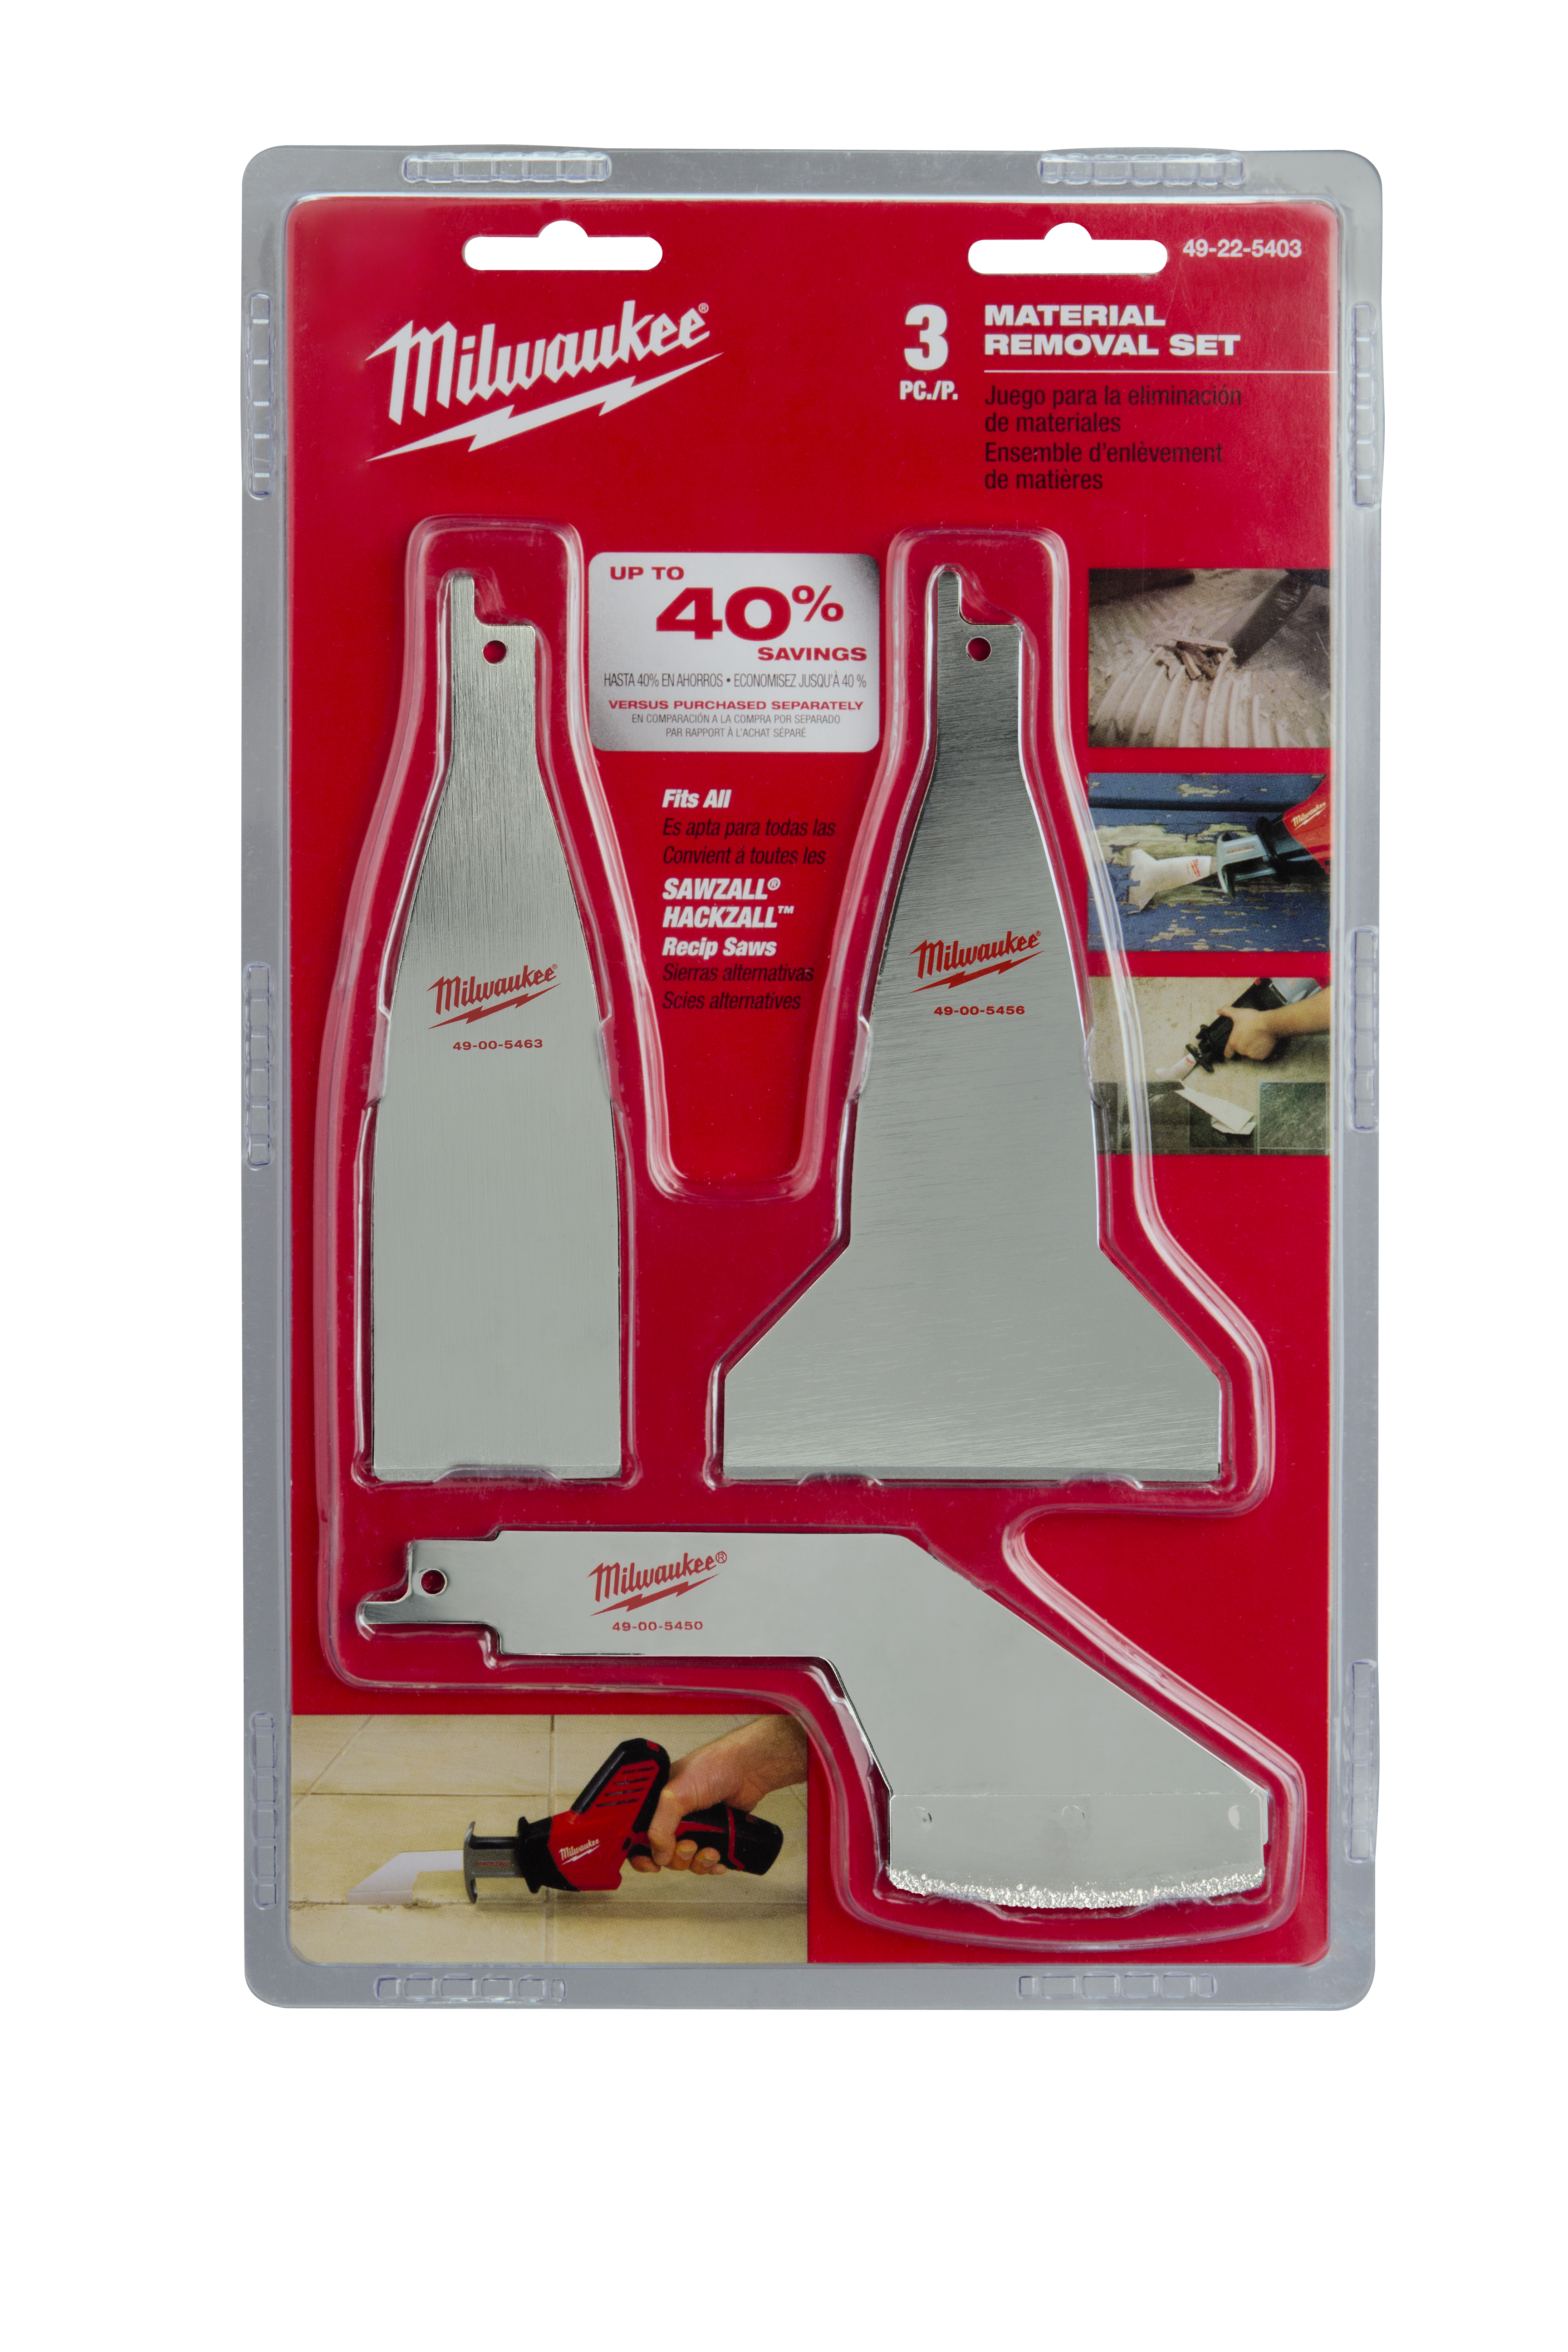 Material Removal Blade Set  - 3 Piece